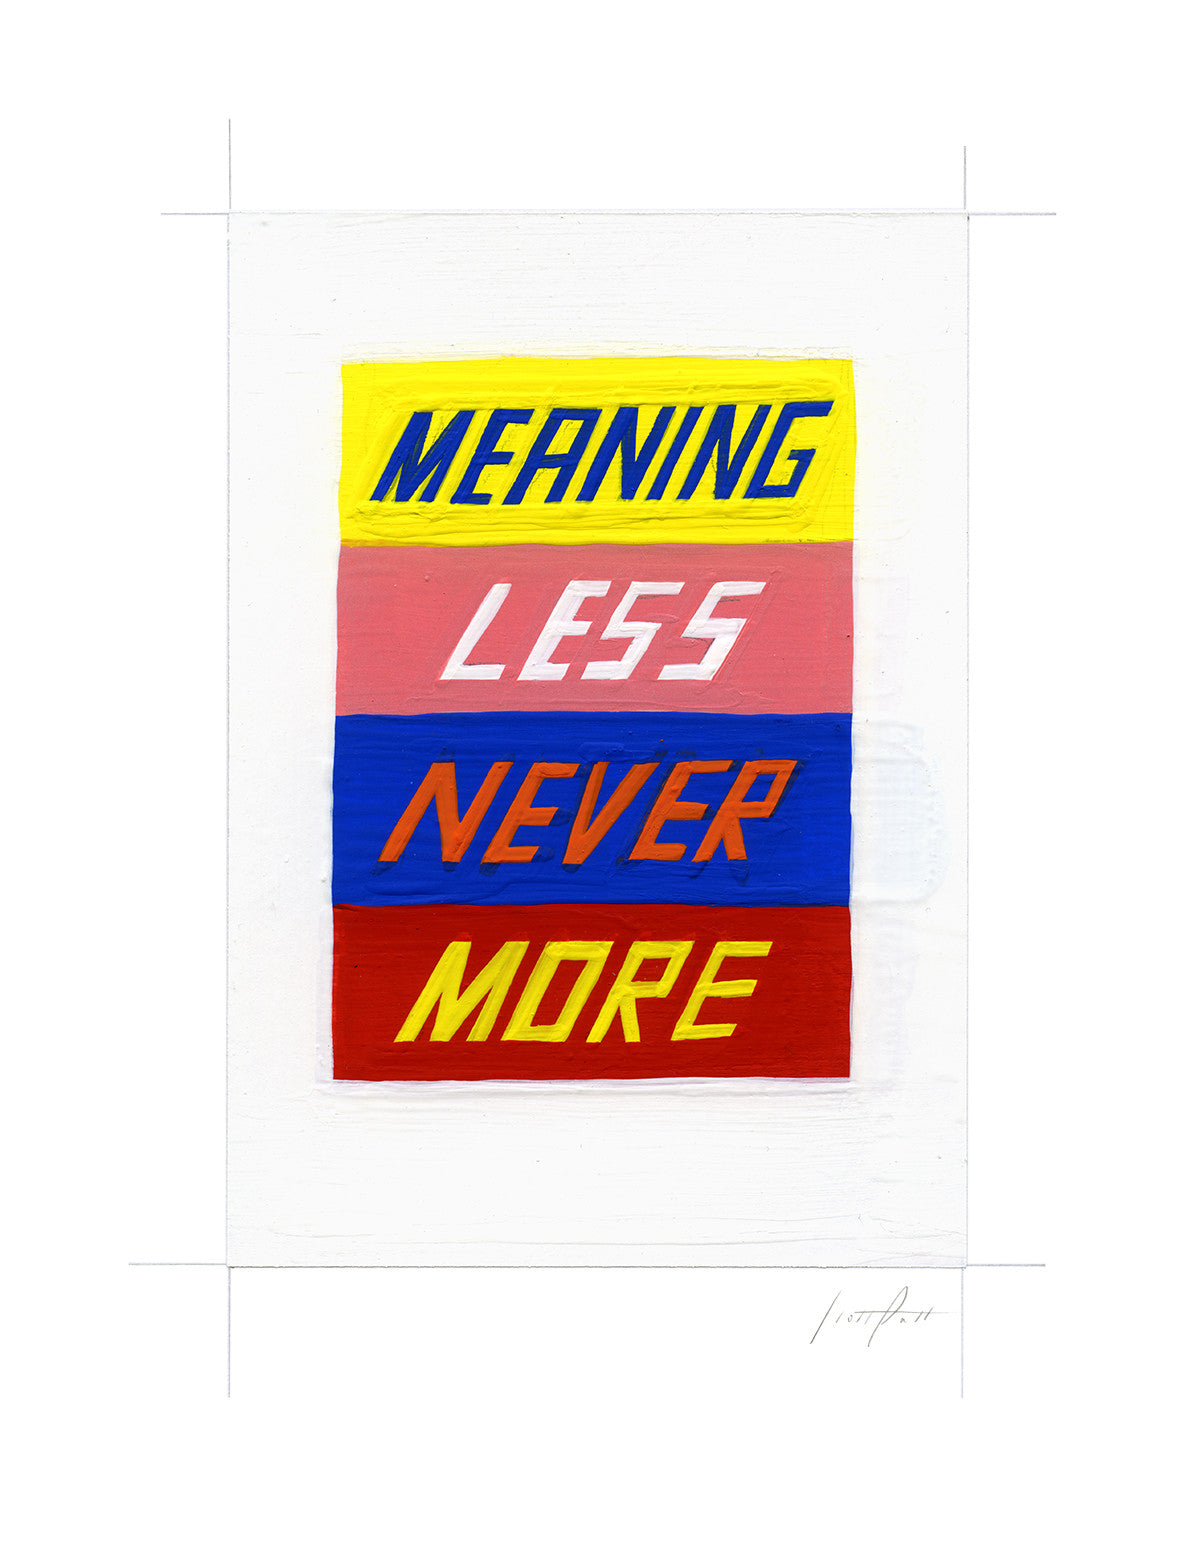 #318 MEANING LESS NEVER MORE